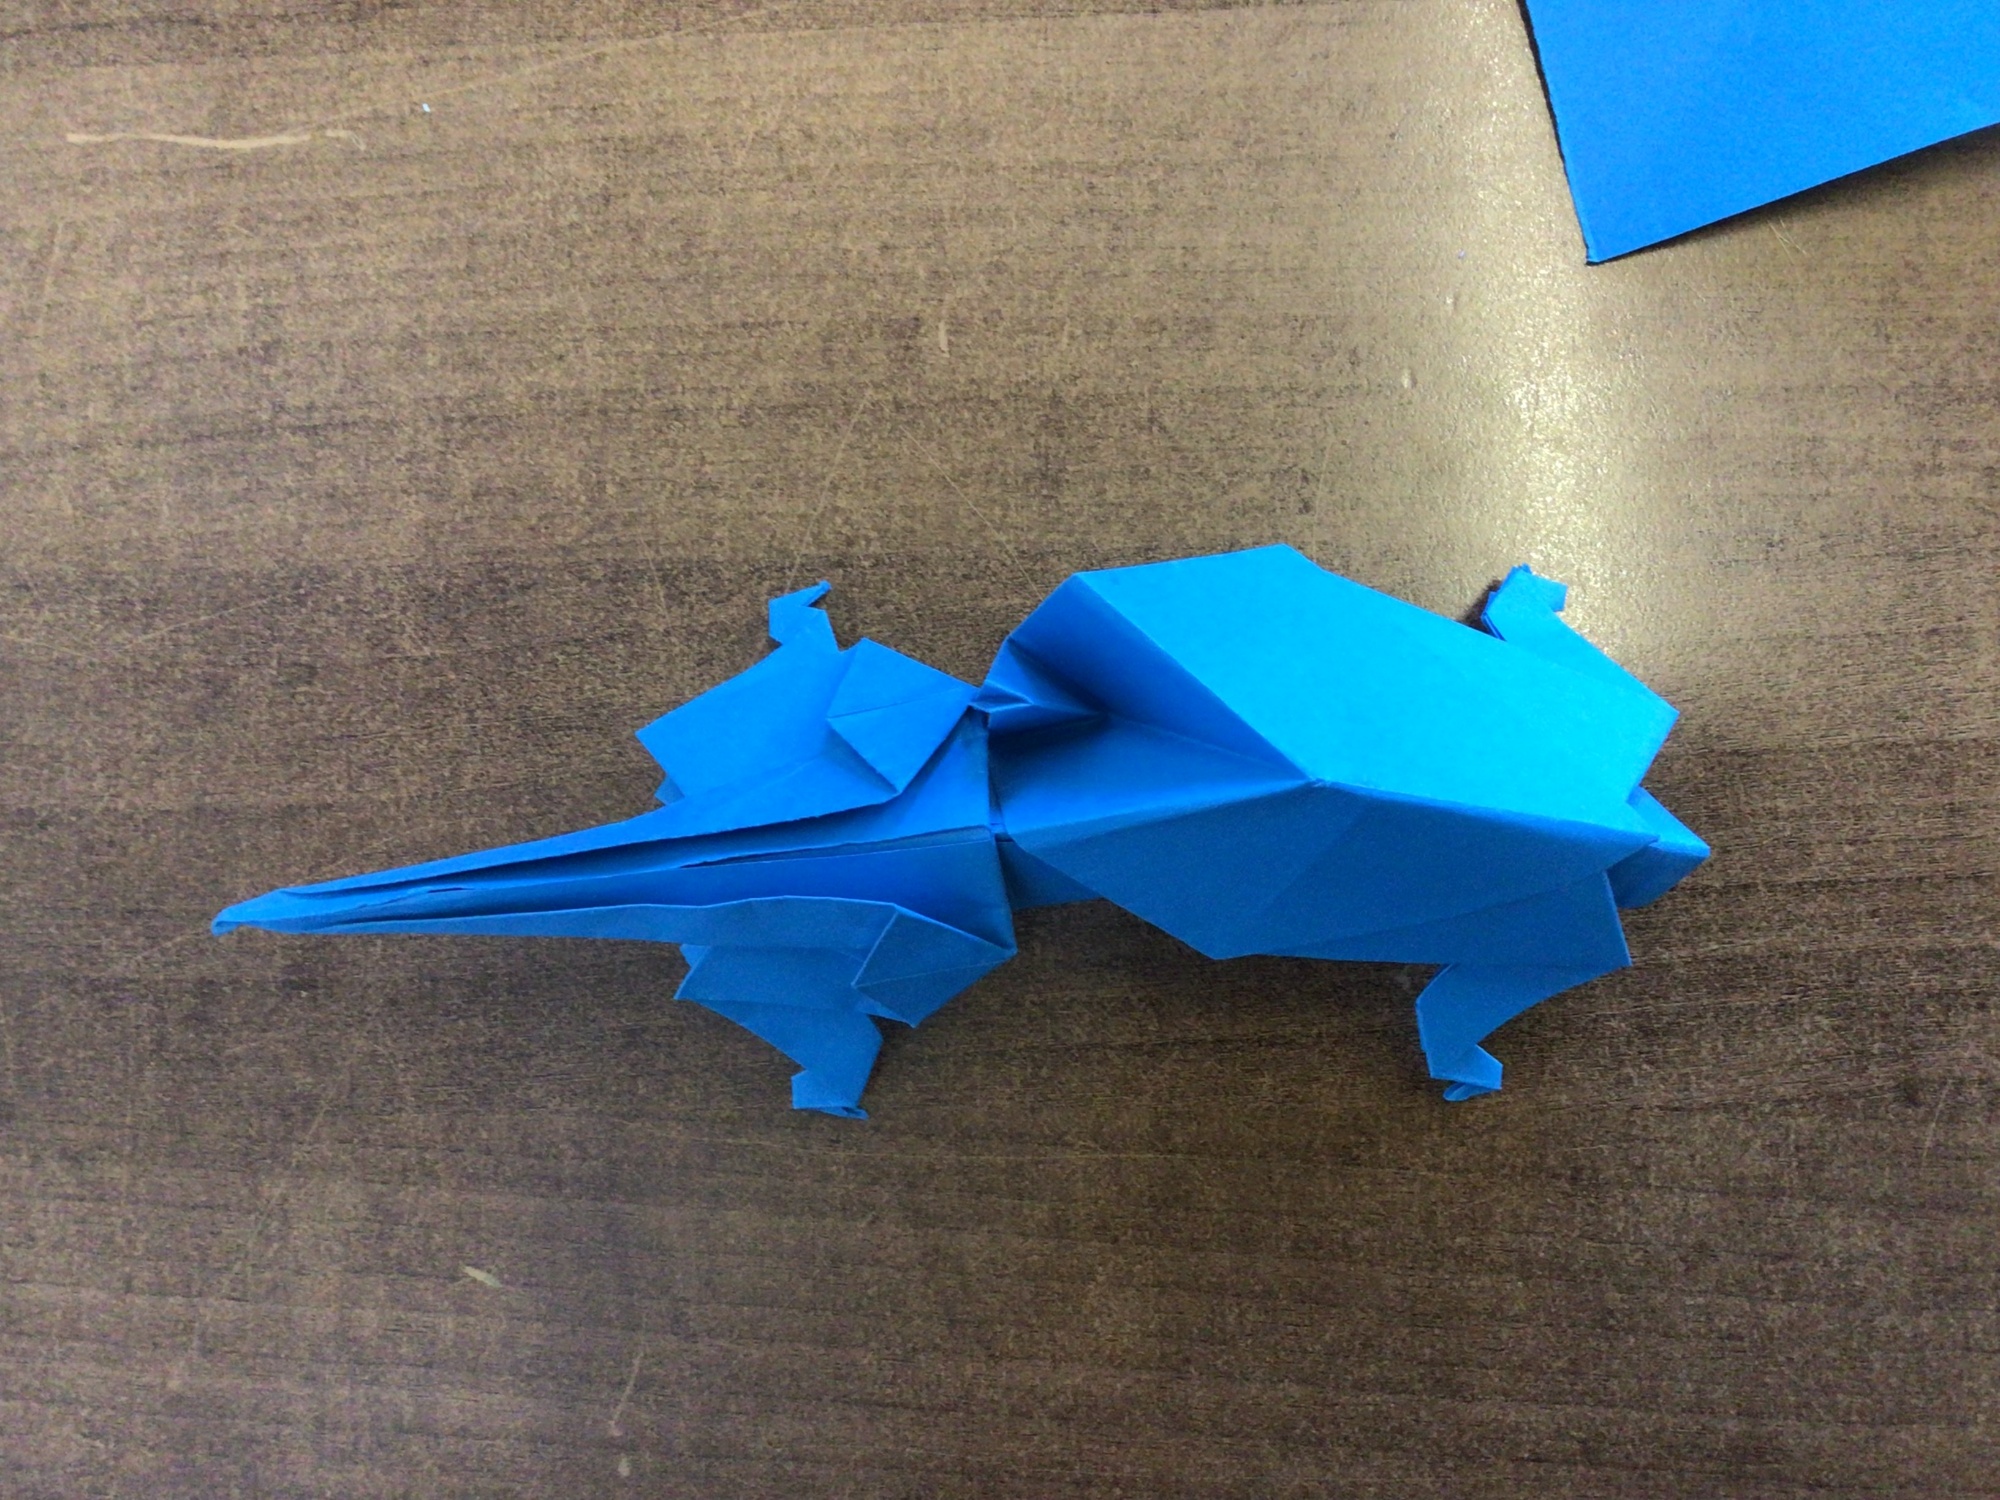 Chinese New Year origami example